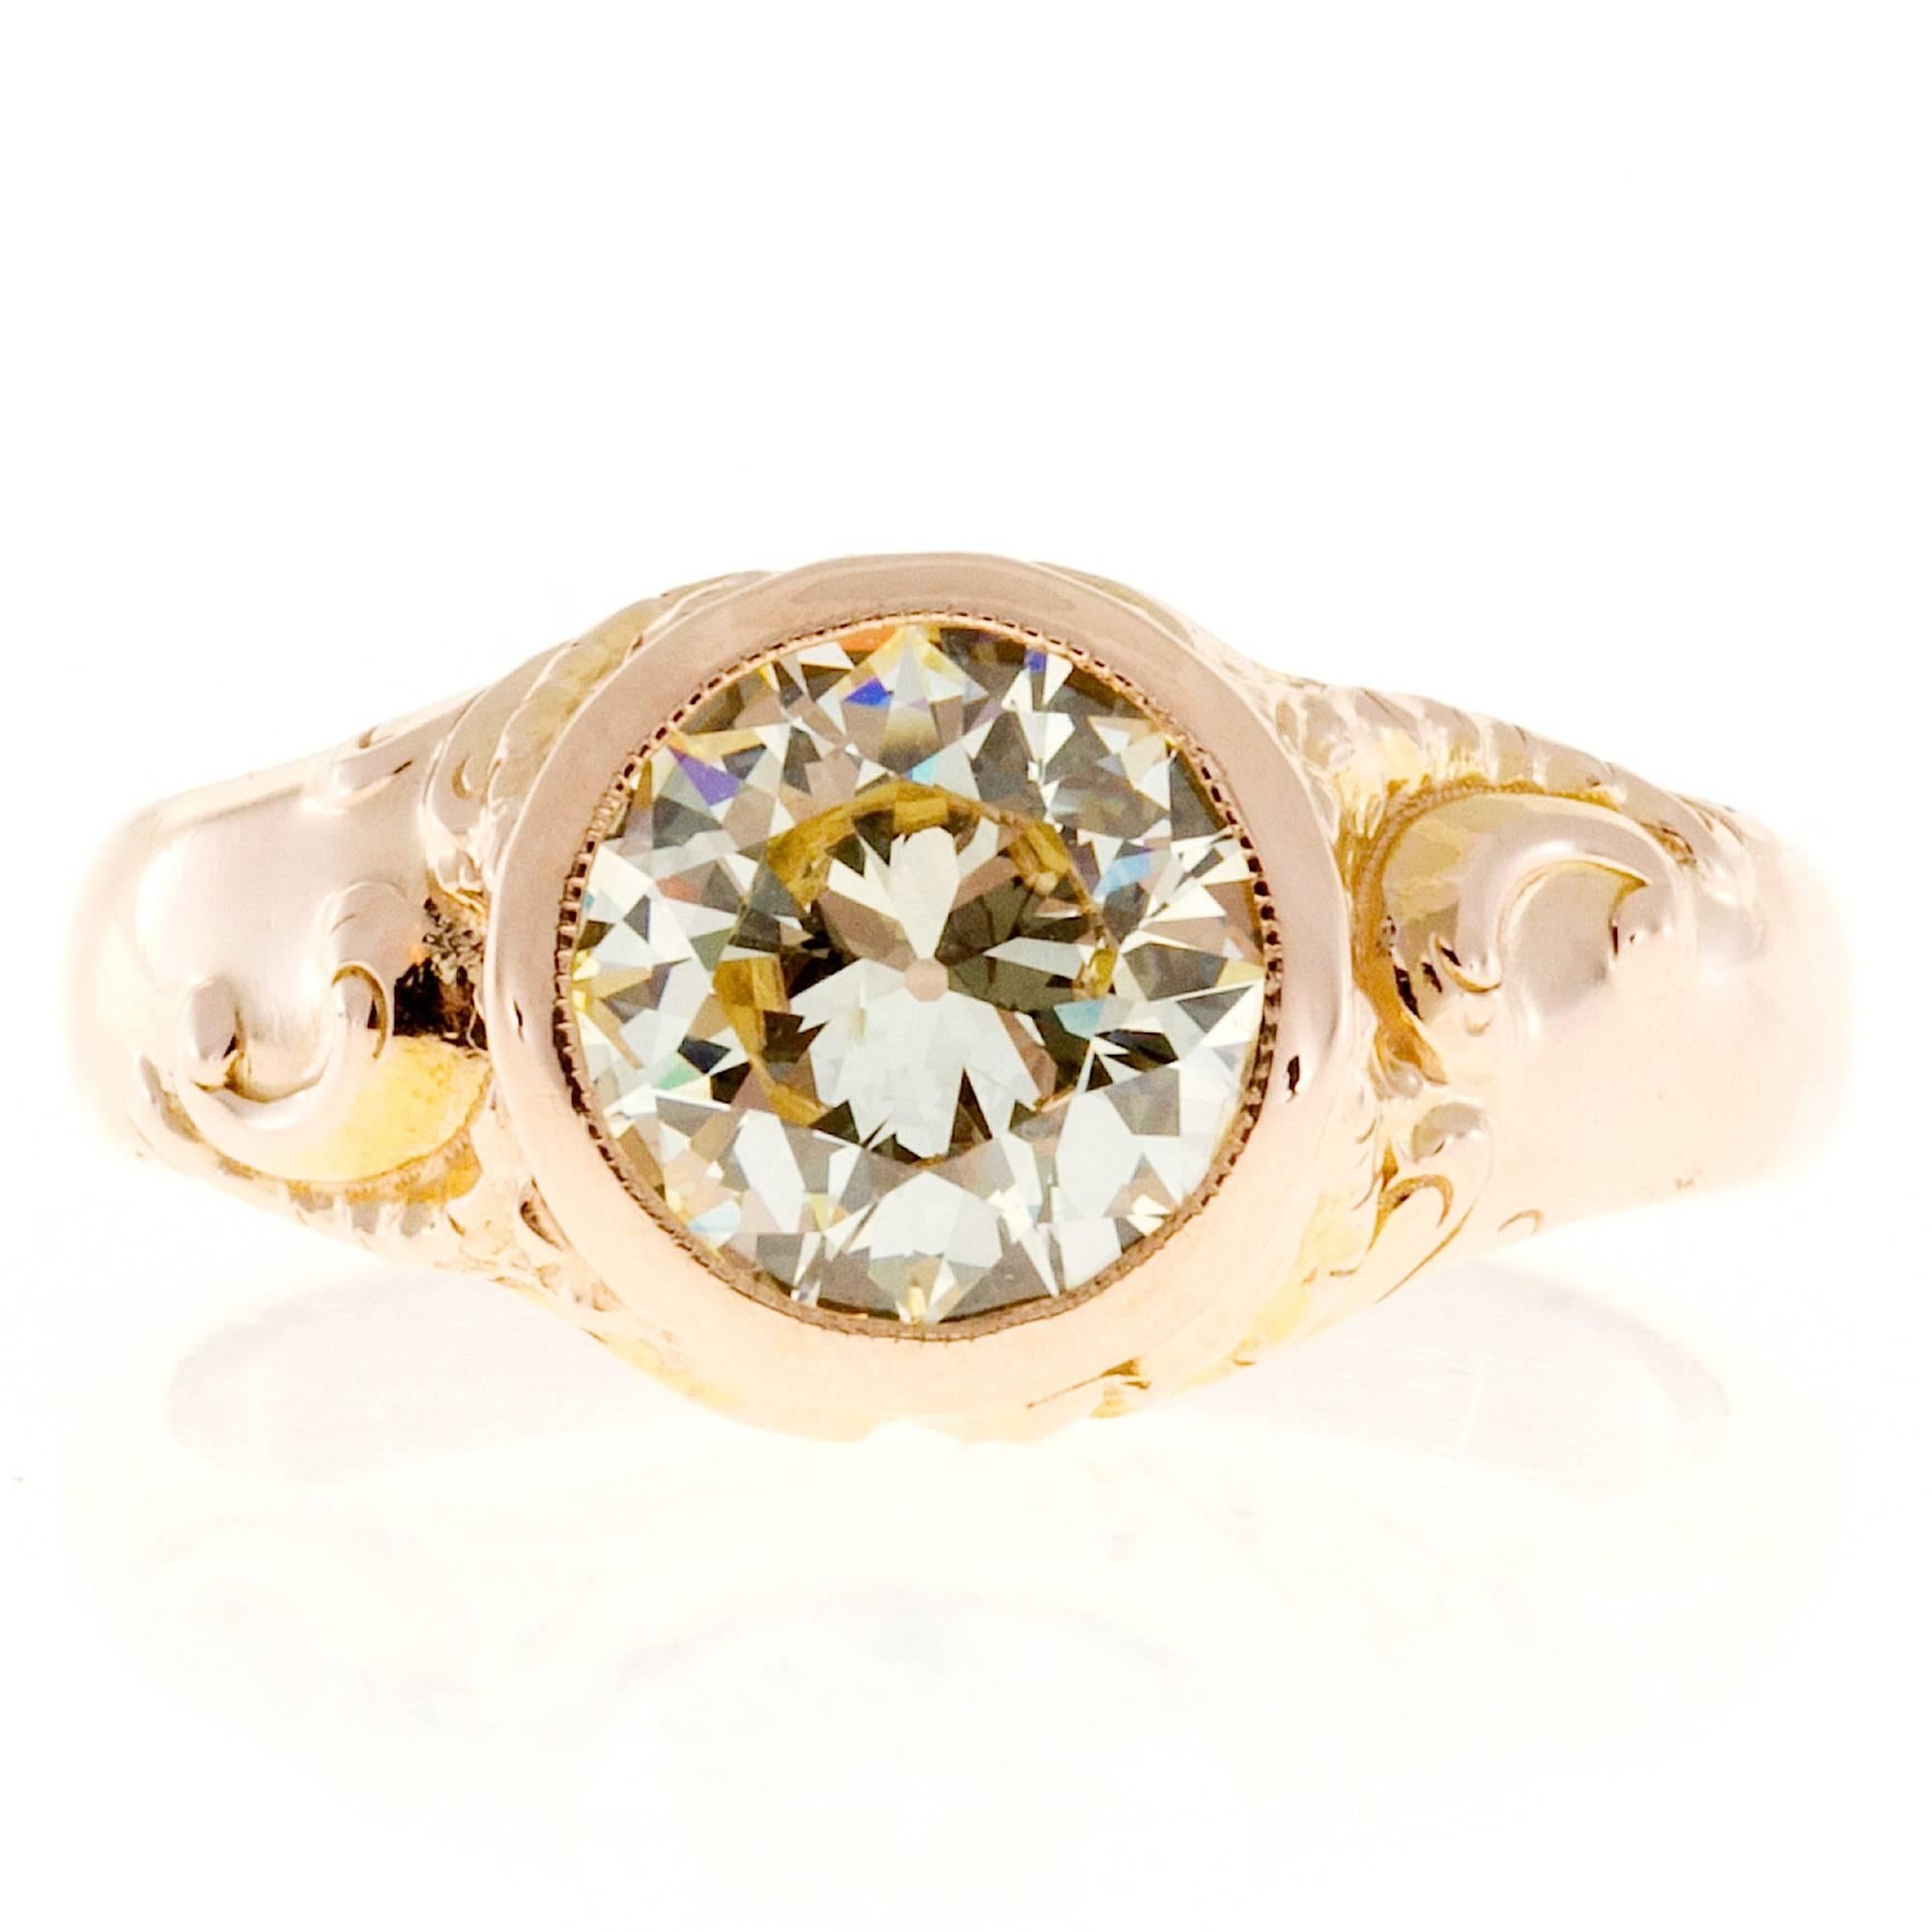 Authentic all original 1895 Art Nouveau old European cut bezel set  certified very light yellow diamond rose gold ring. This ring can be worn by both women and men. 

1 round diamond, approx. total weight 2.12cts, Q – R, SI2, GIA certificate #